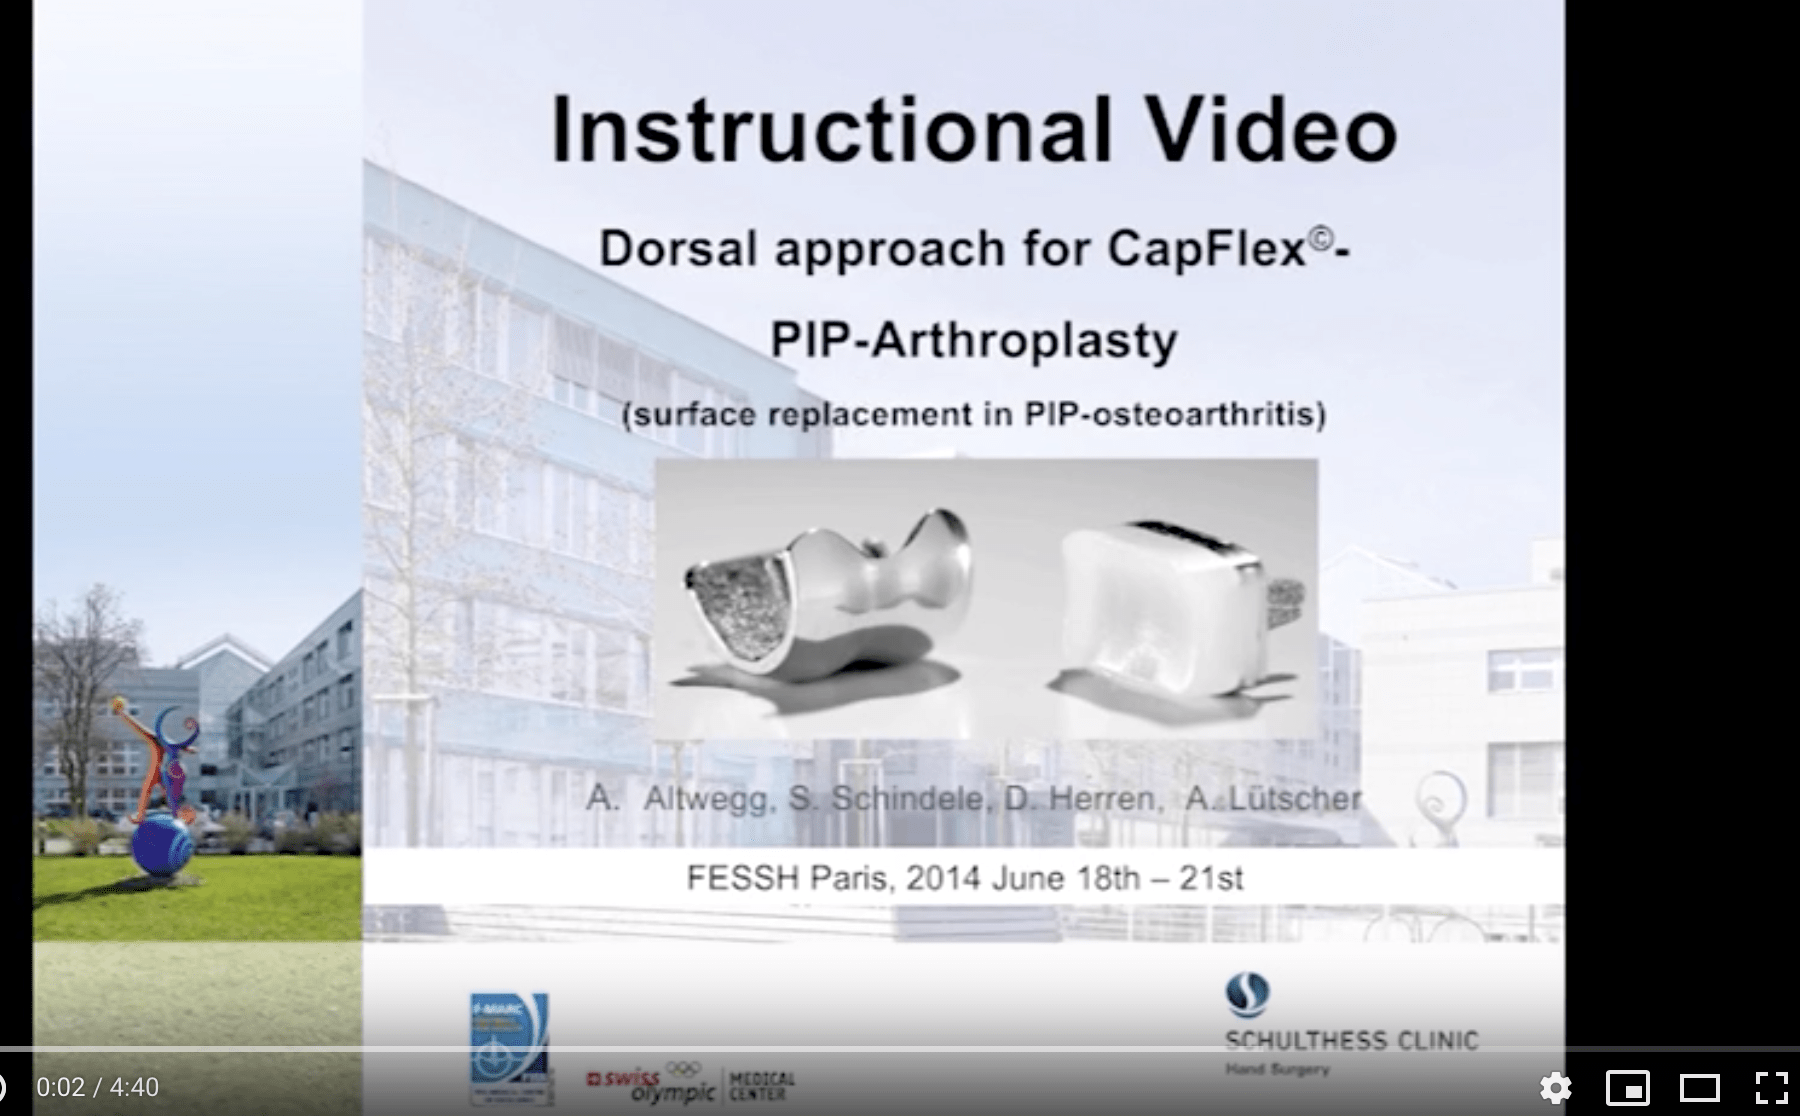 CapFlex surgery with Chamay approach